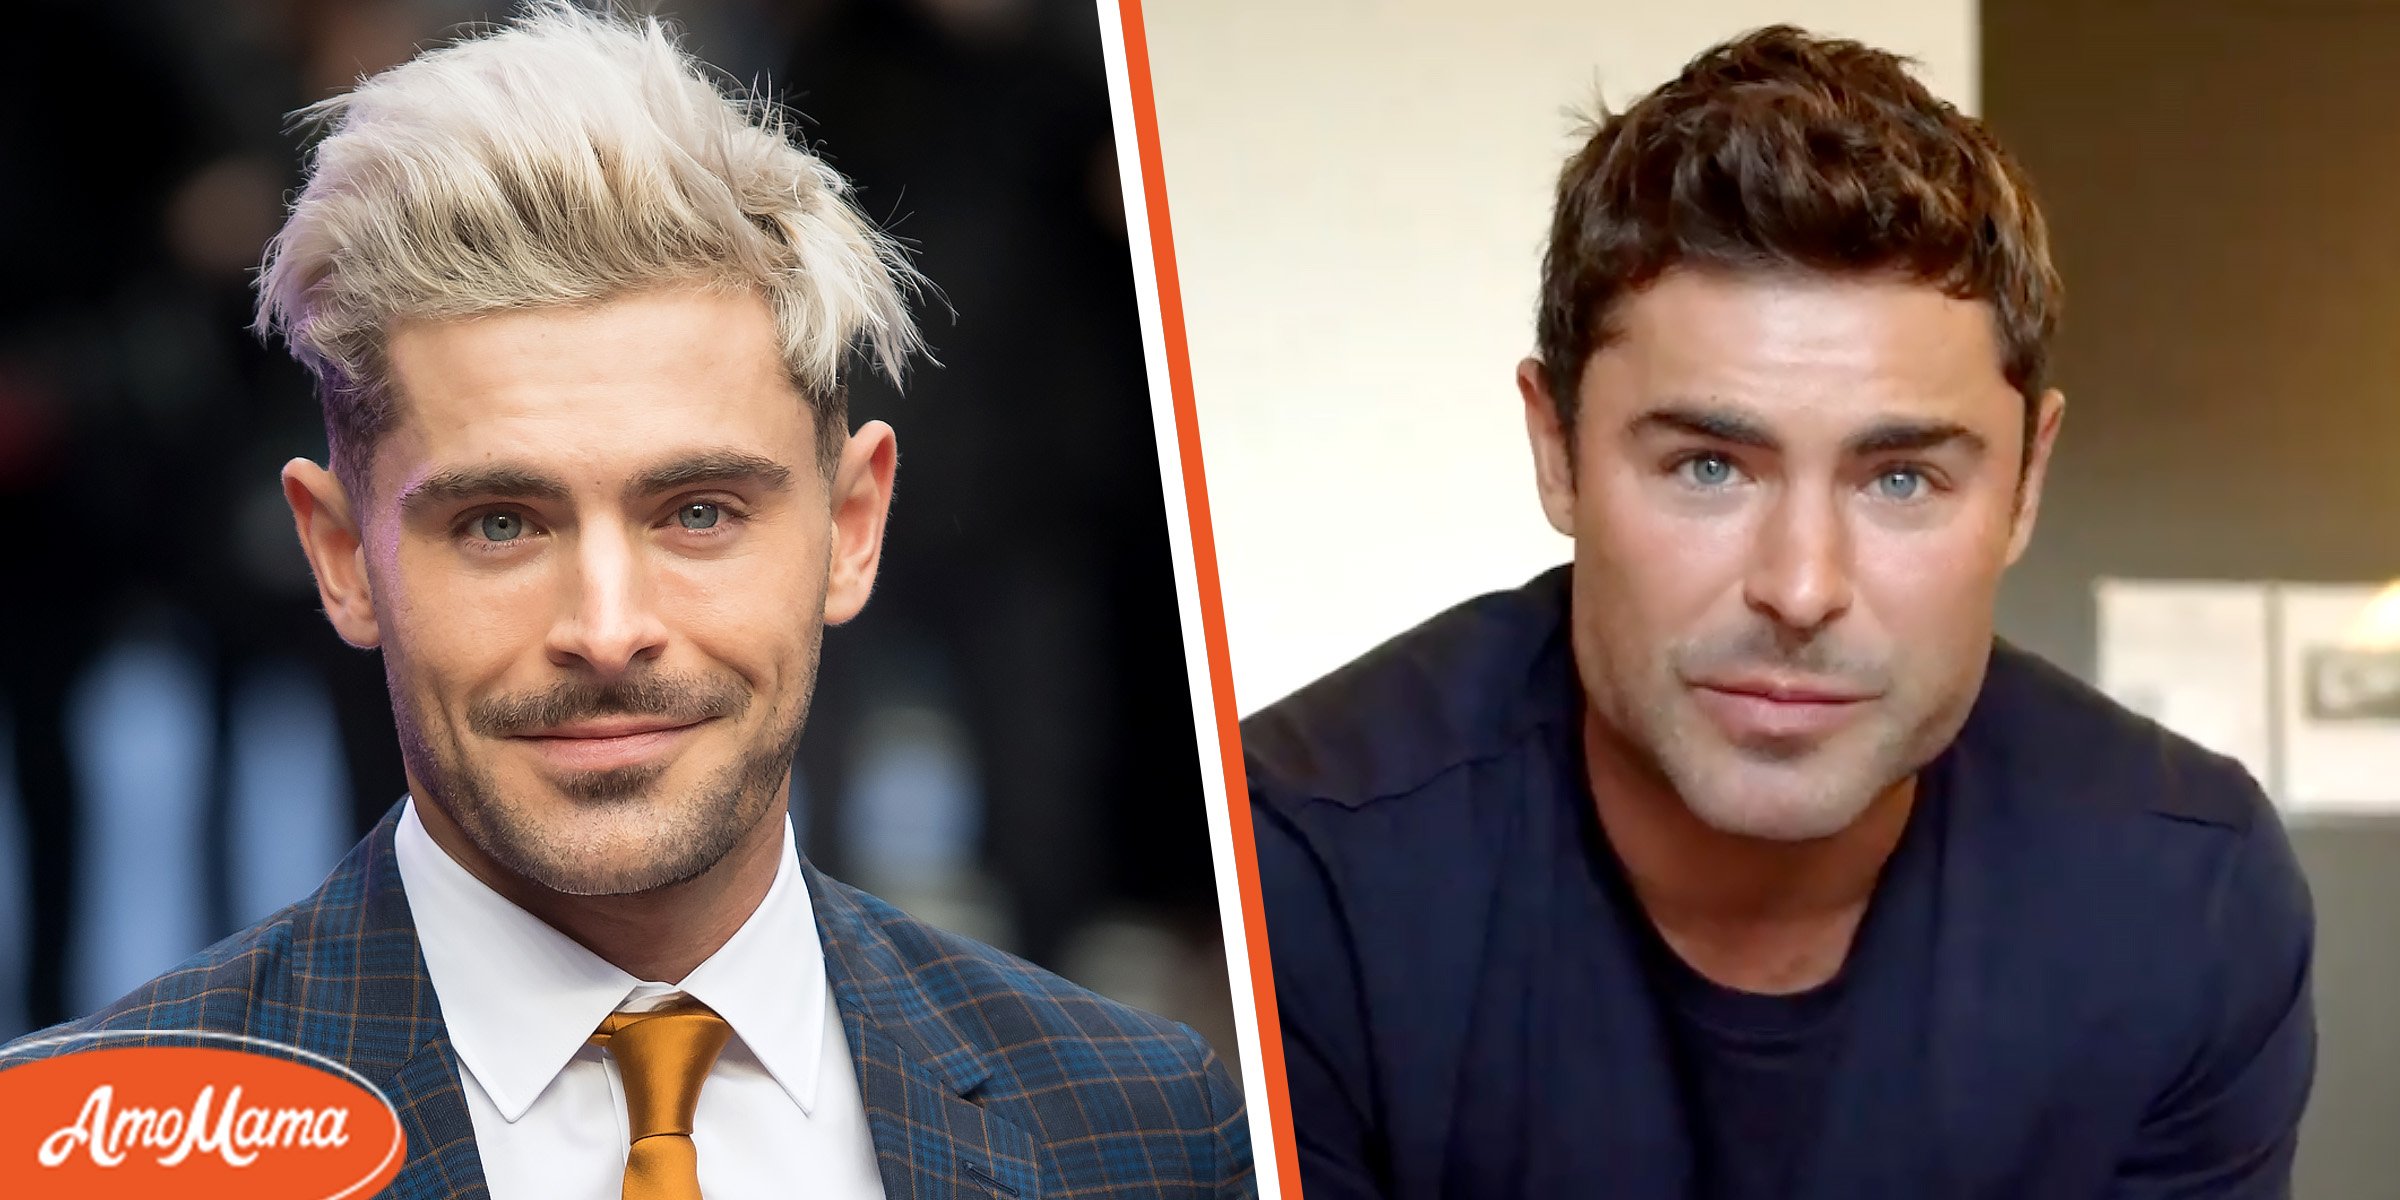 What Happened to Zac Efron’s Face? Actor Shut Down Plastic Surgery Rumors